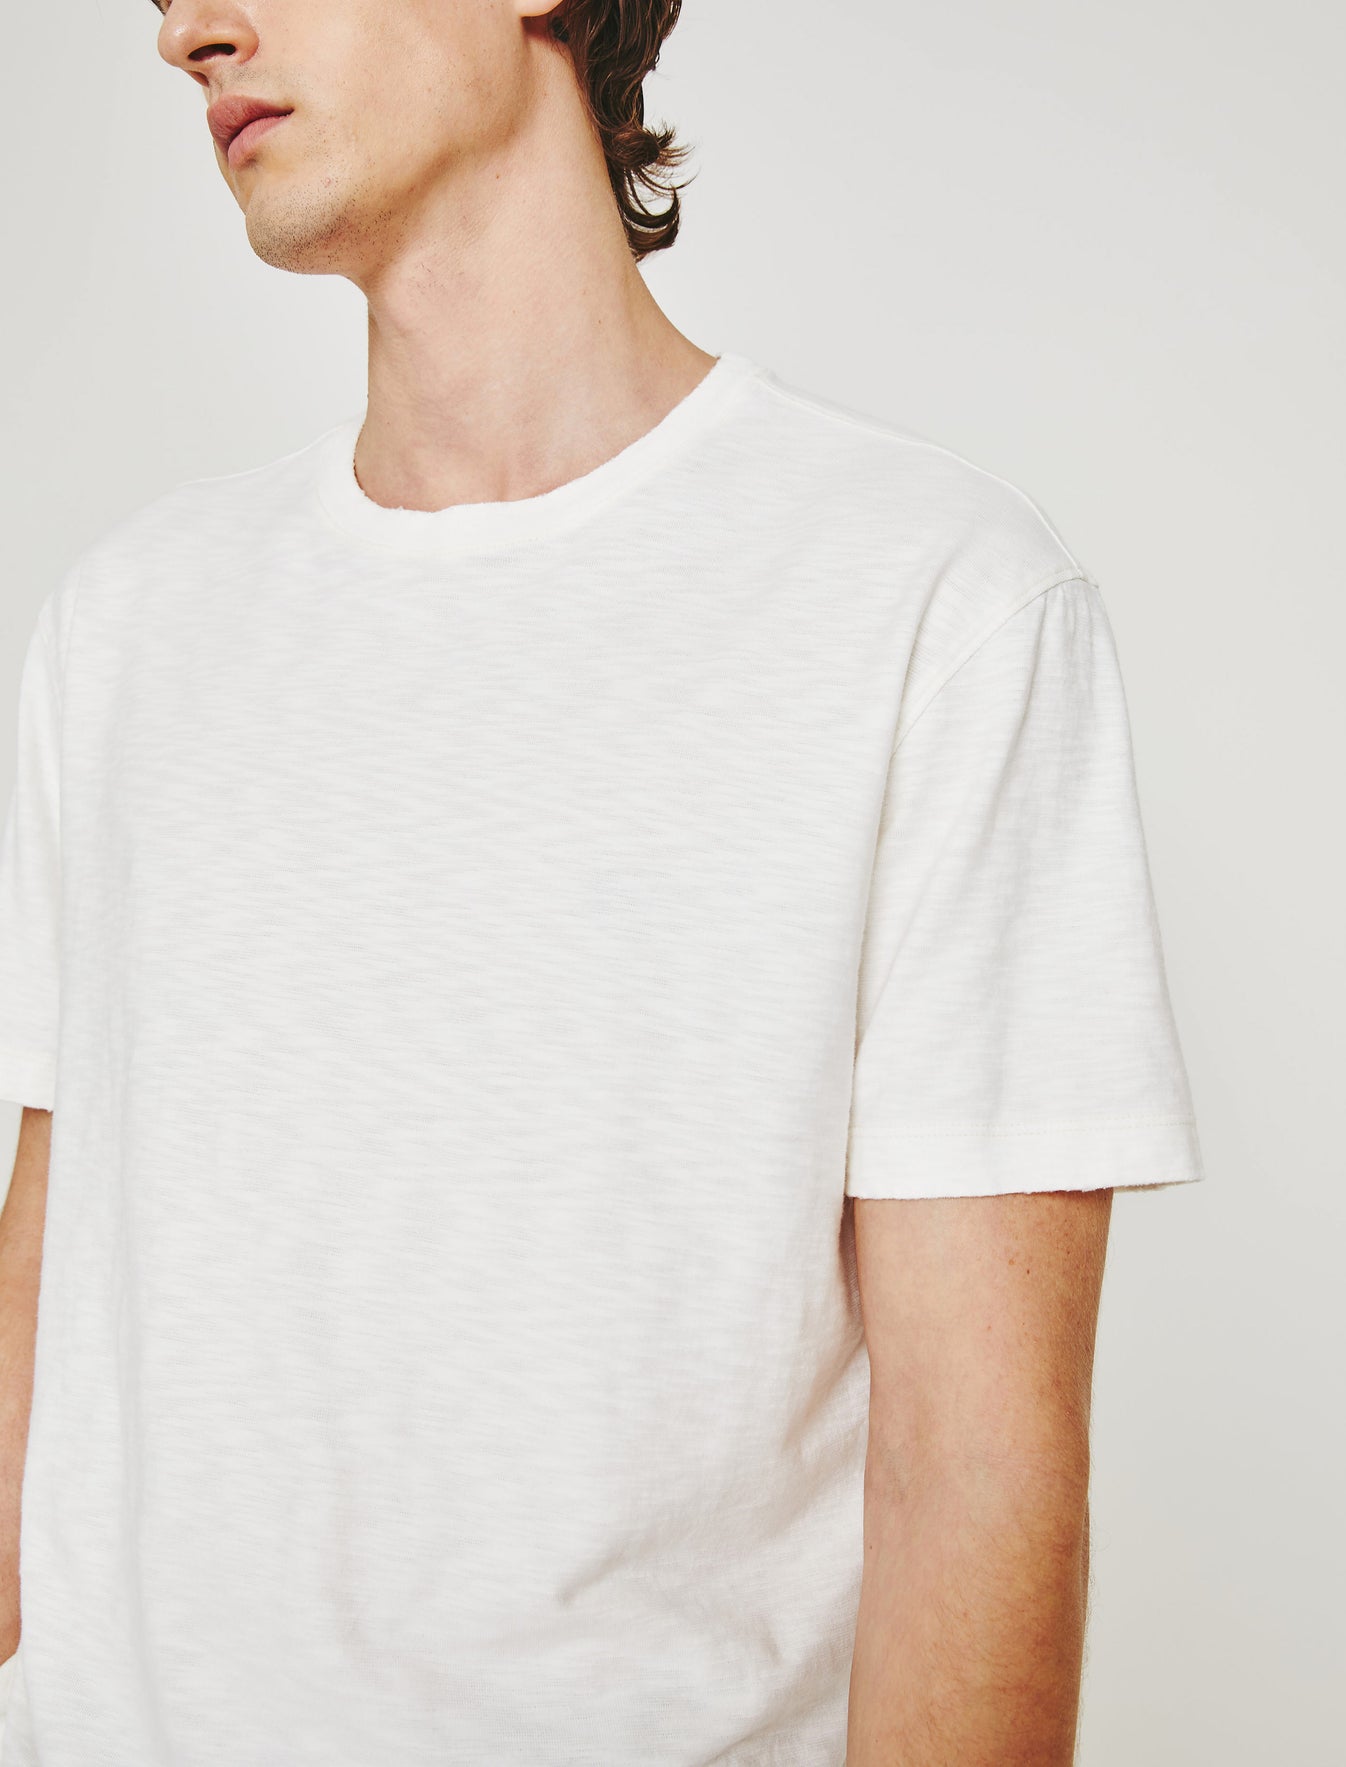 Wesley Crew 5 Years True White Relaxed T-Shirt Men Top  Photo 3